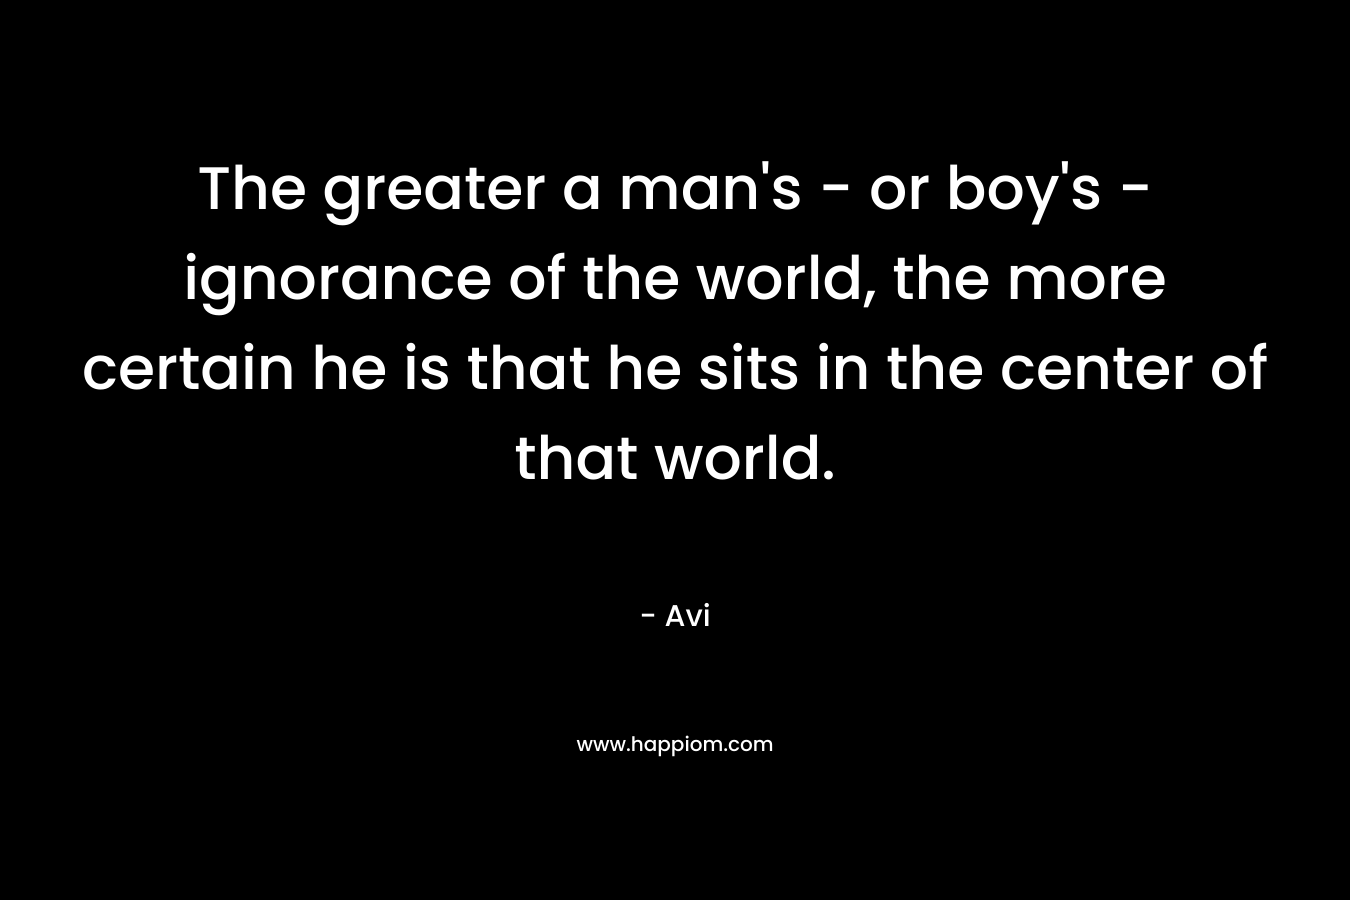 The greater a man's - or boy's - ignorance of the world, the more certain he is that he sits in the center of that world.